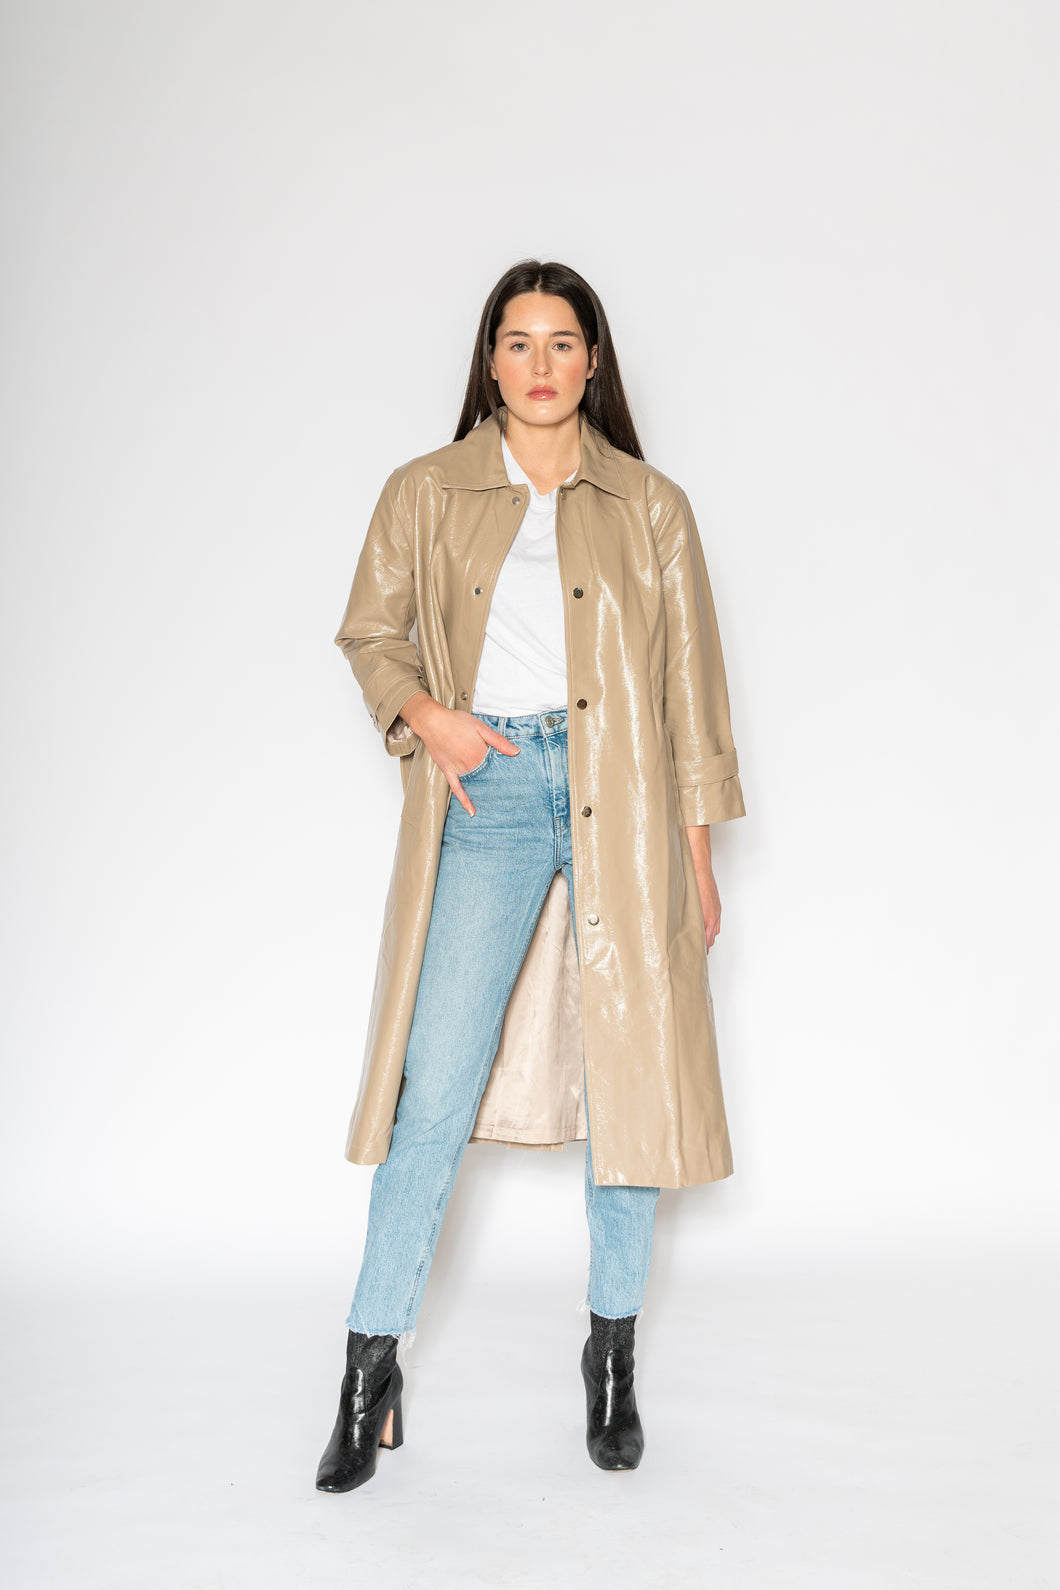 Patent Trench - As You Wish Boutique patent trench coat beige trench coat shimmer trench coat patent leather trench coat beige patent leather fall spring coat